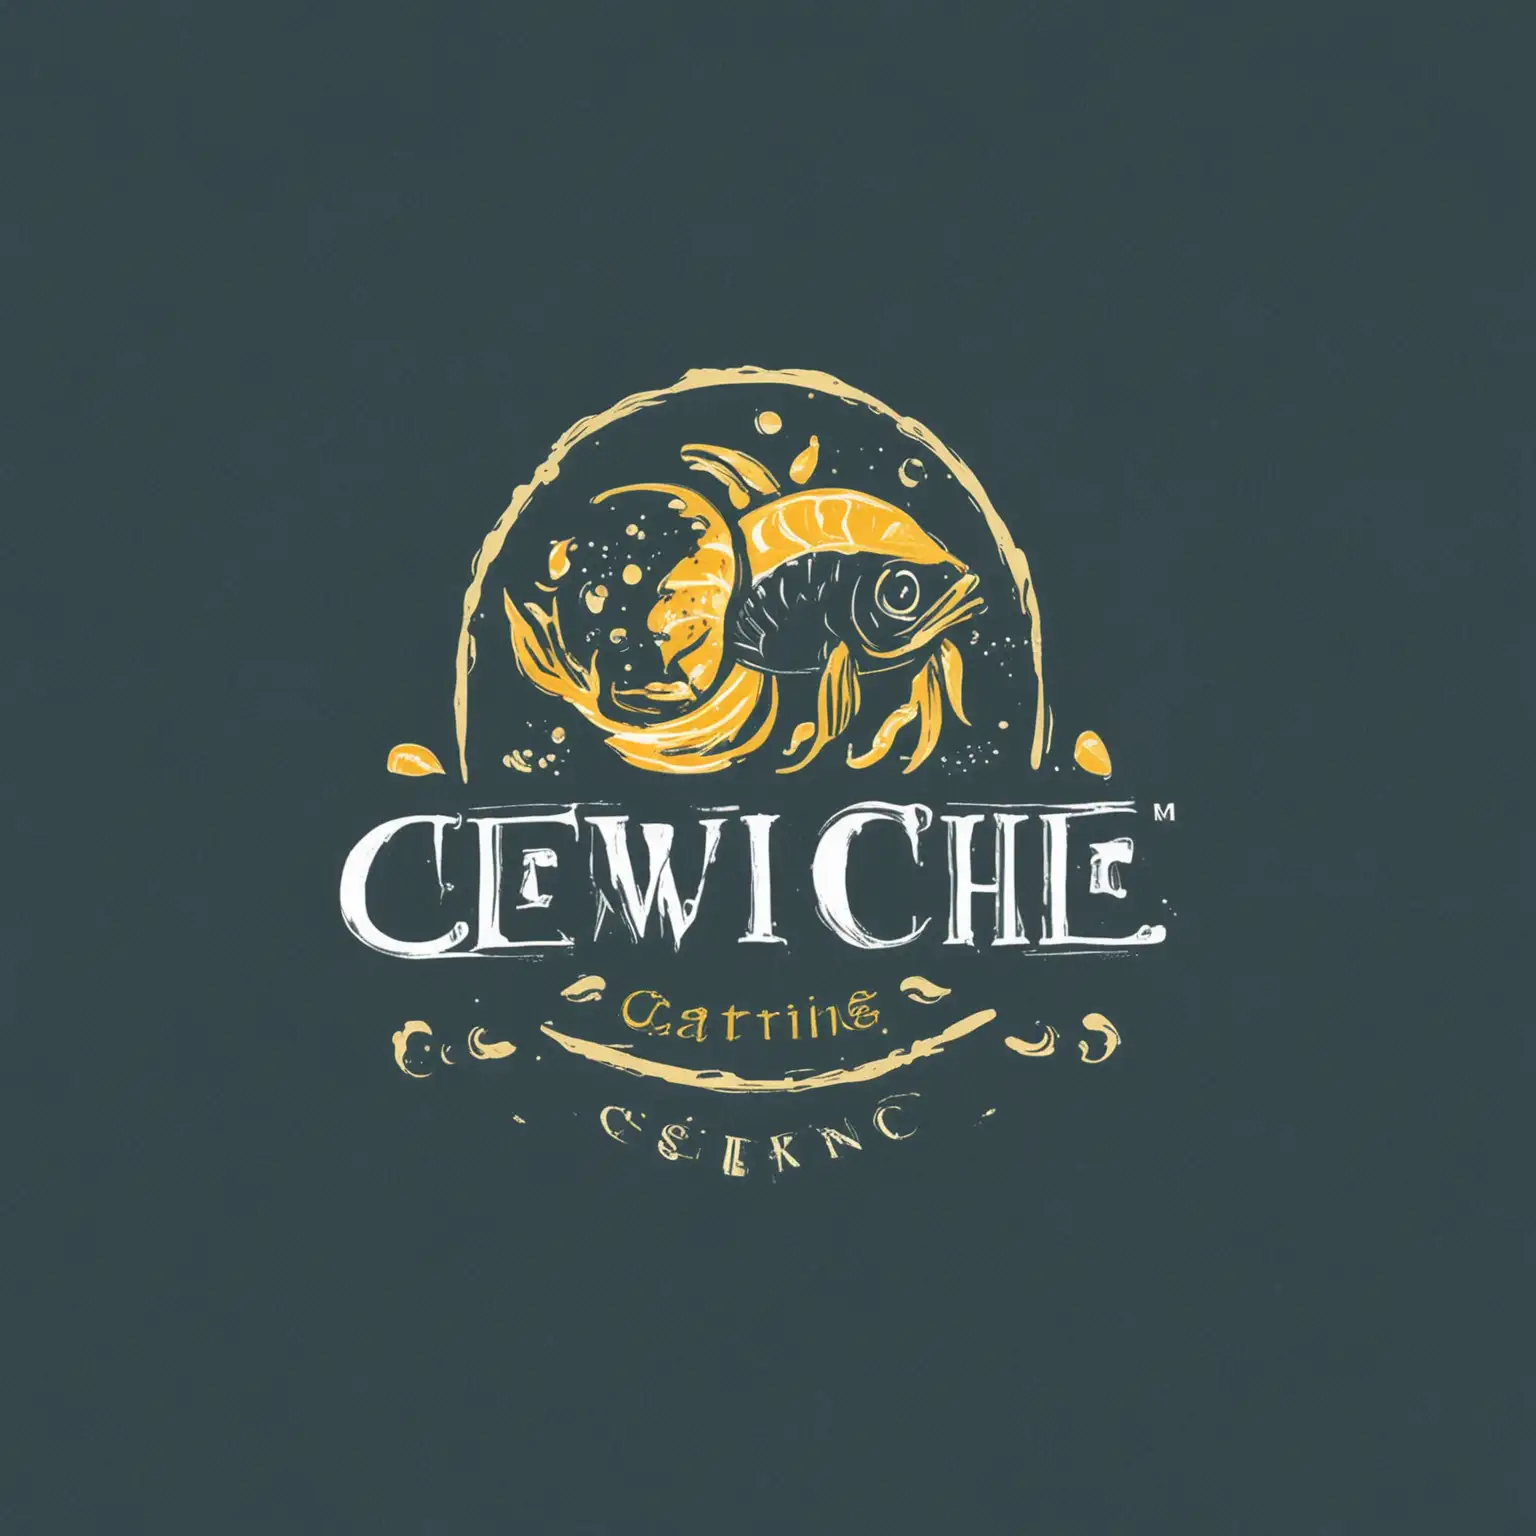 Design a logo for a ceviche seafood catering business. The logo should be simple, minimalist, and attractive. Incorporate elements of seafood, such as fish, shrimp, or citrus slices. Use a clean, modern font for the business name. The color palette should include shades of blue to represent the ocean, with hints of yellow or green to suggest freshness and citrus. Ensure the overall design is elegant and professional, suitable for a catering business